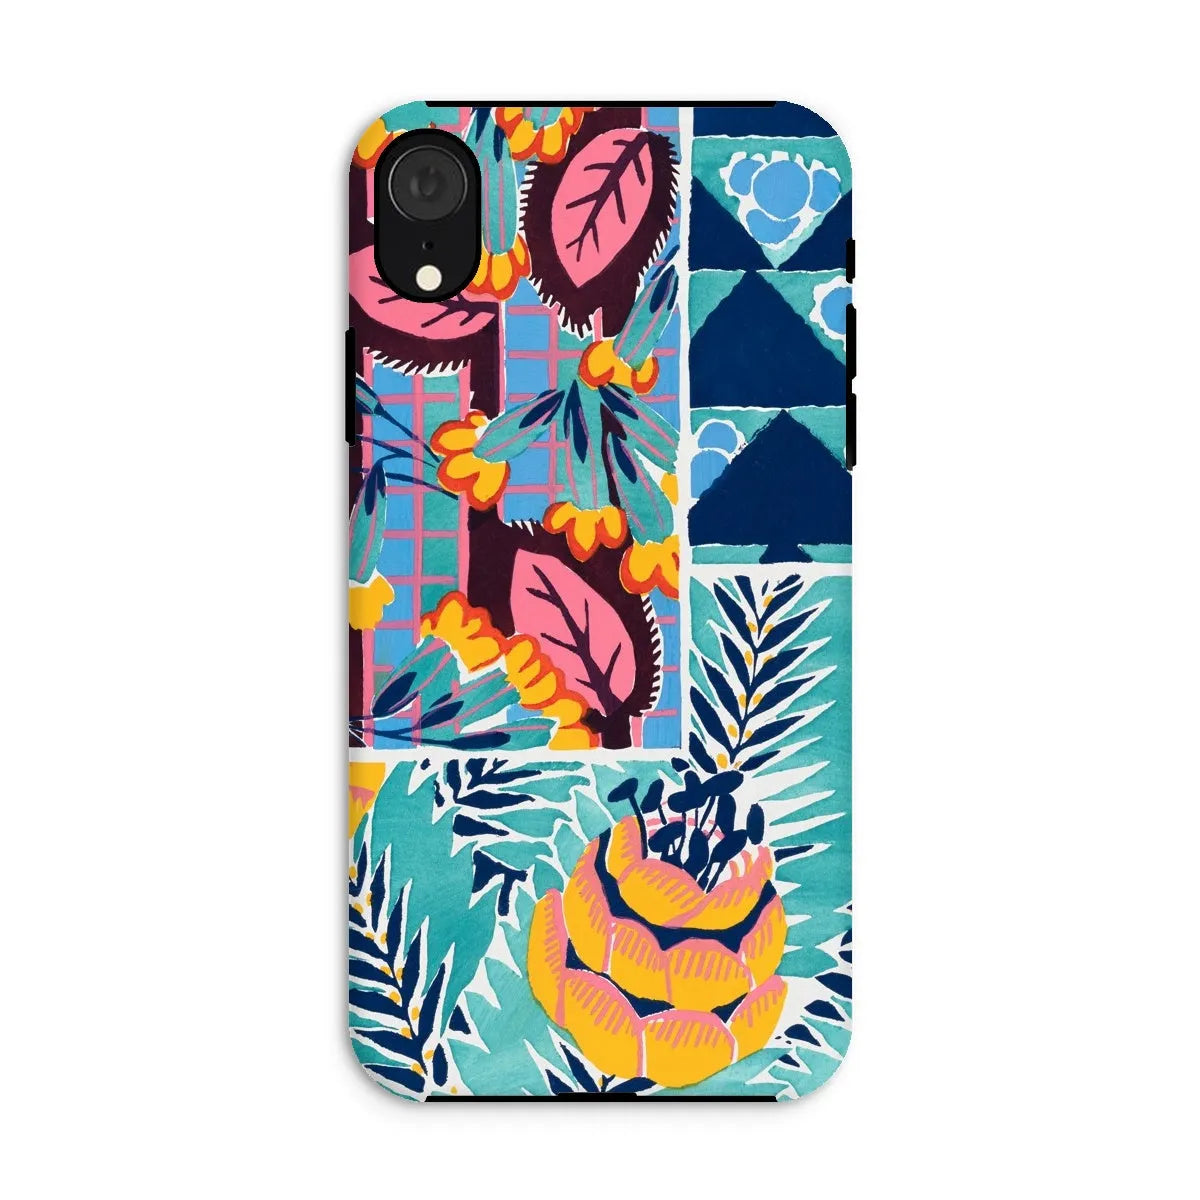 Fabric & Rugs - Pochoir Patterns Phone Case - E. A. Séguy - Iphone Xr / Matte - Mobile Phone Cases - Aesthetic Art